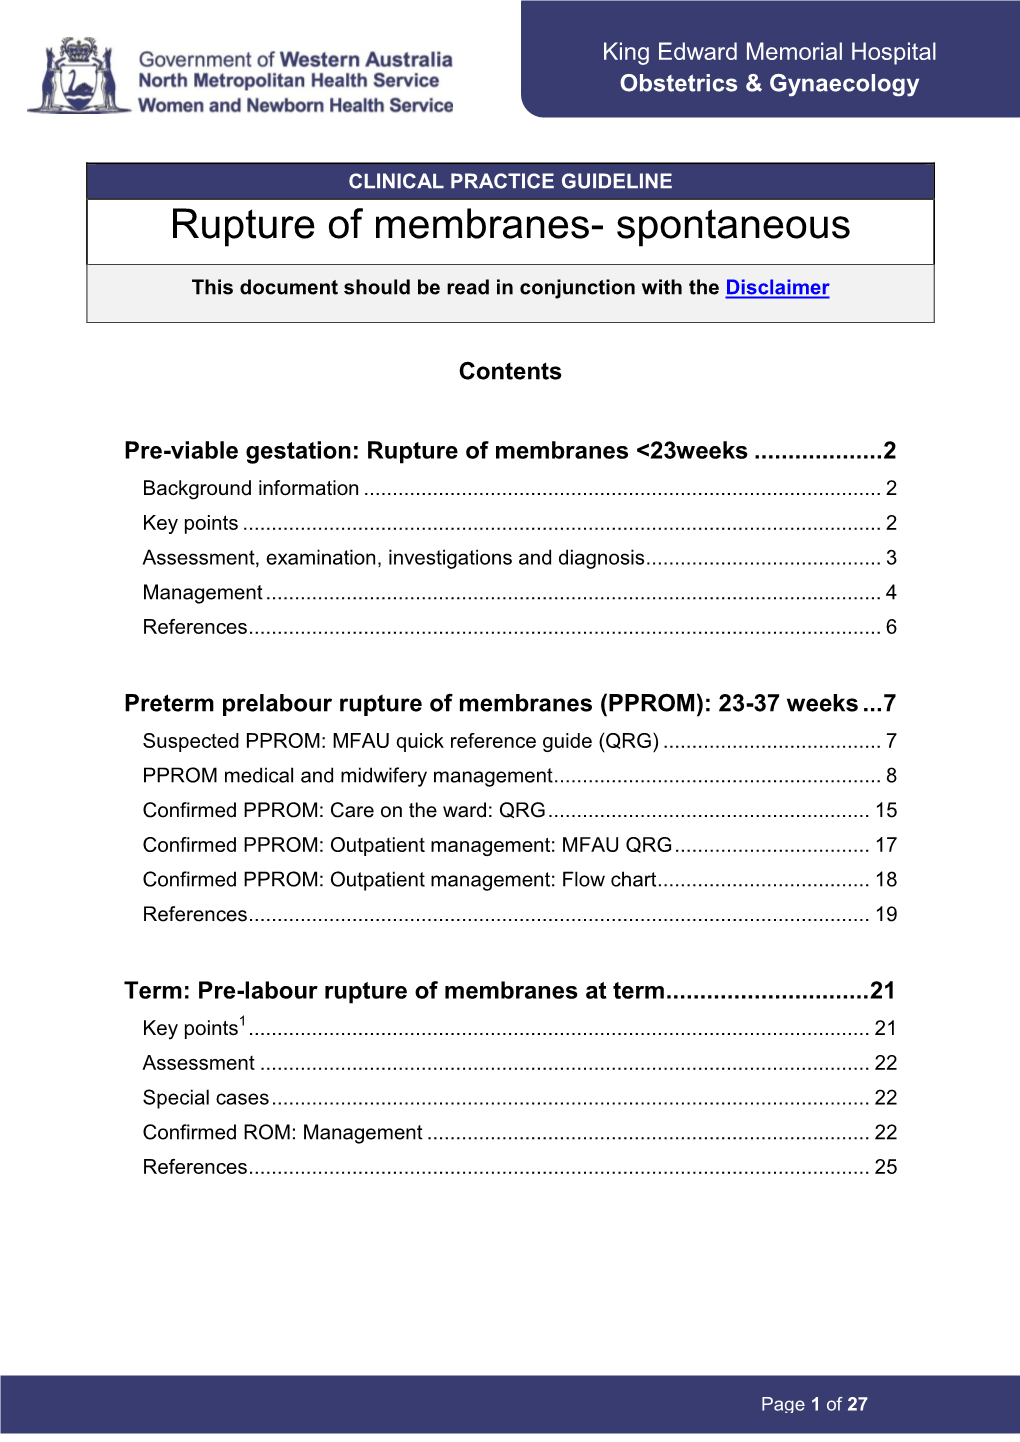 Rupture of Membranes- Spontaneous